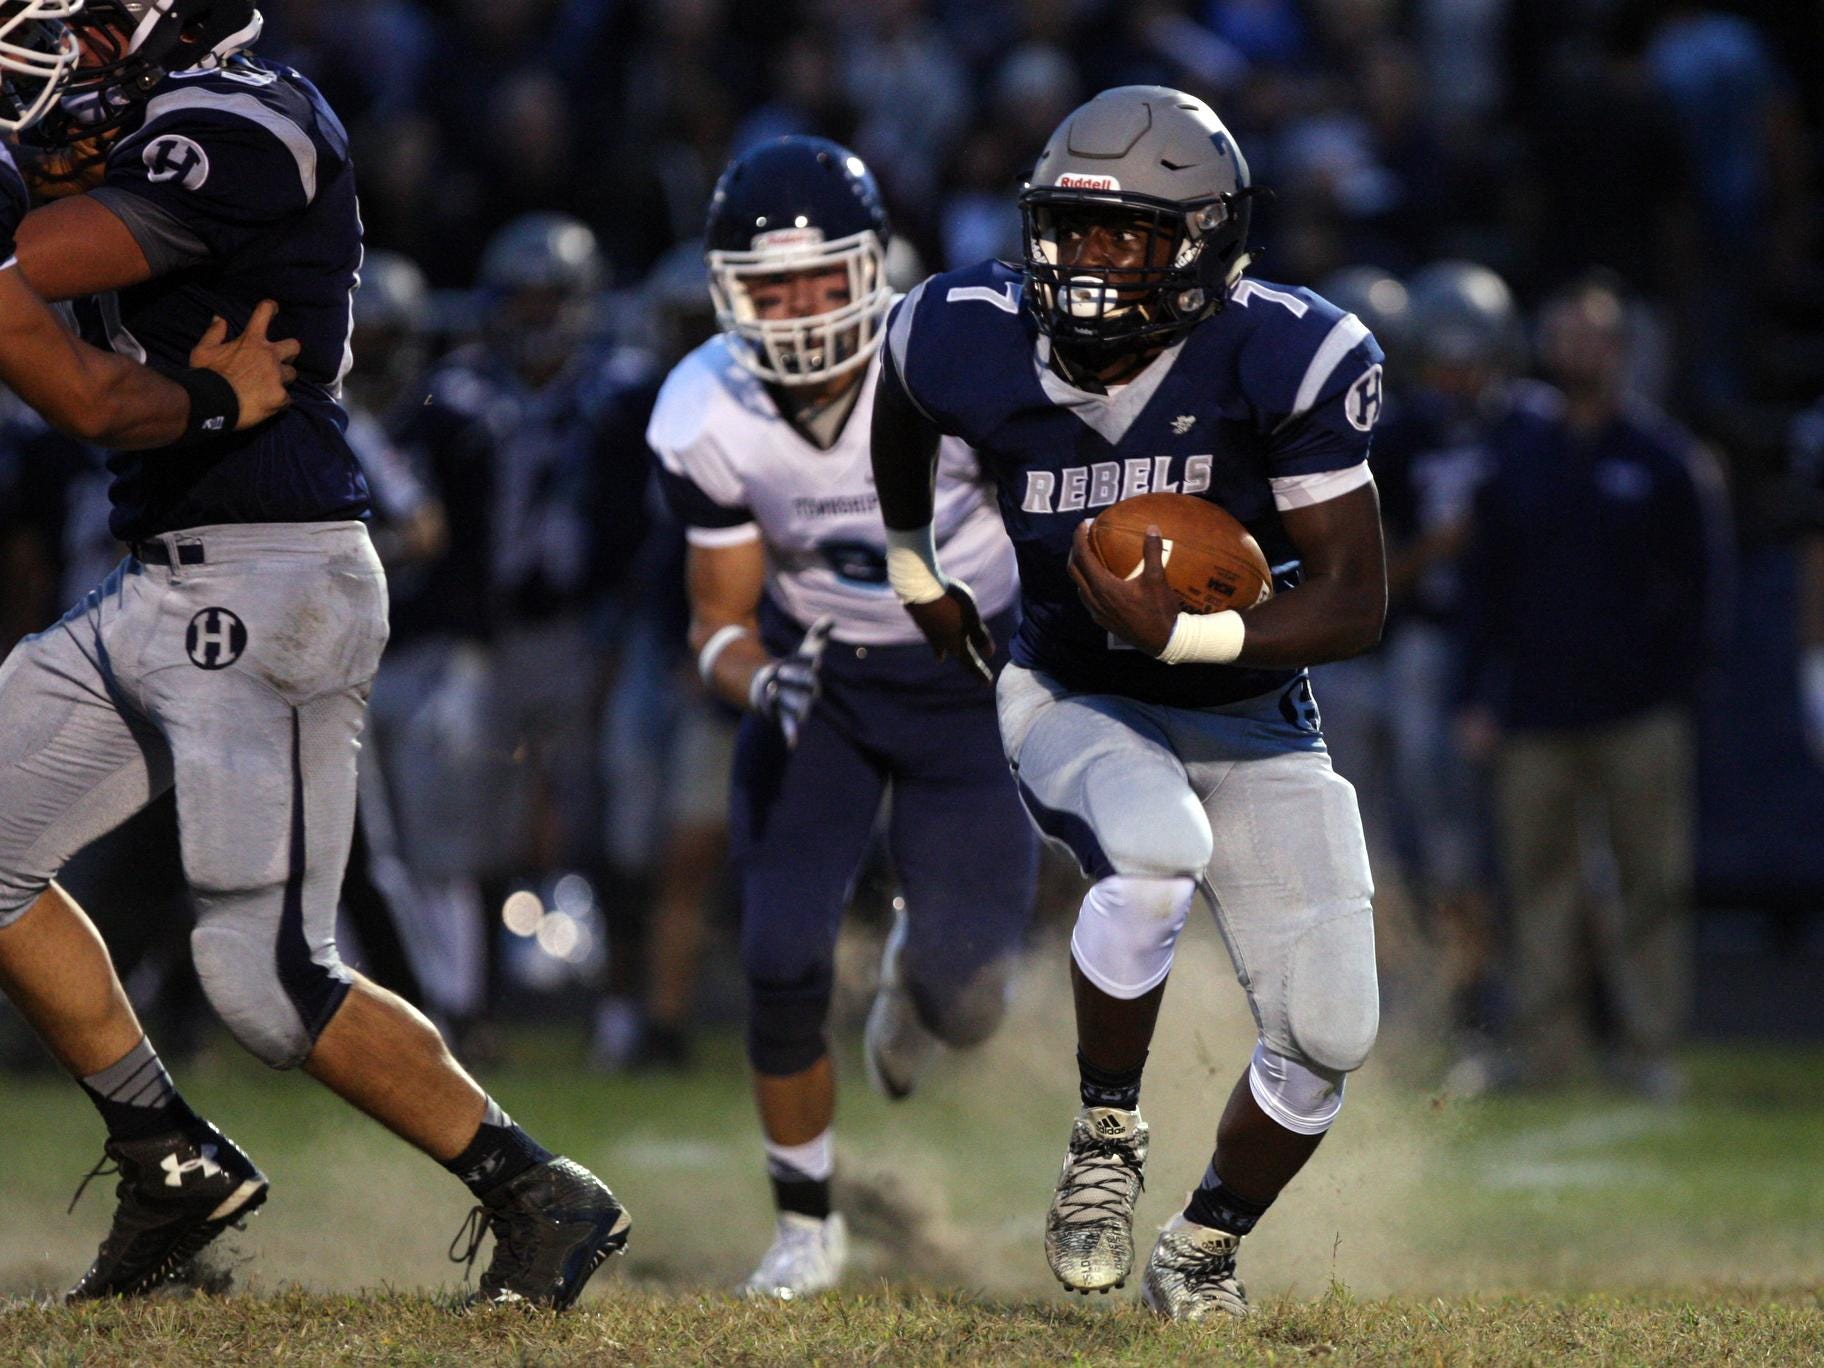 Mekai Gandy, #7 Howell, carries the ball against Freehold Township in a football game Friday, September 25, 2015, at Howell High School.